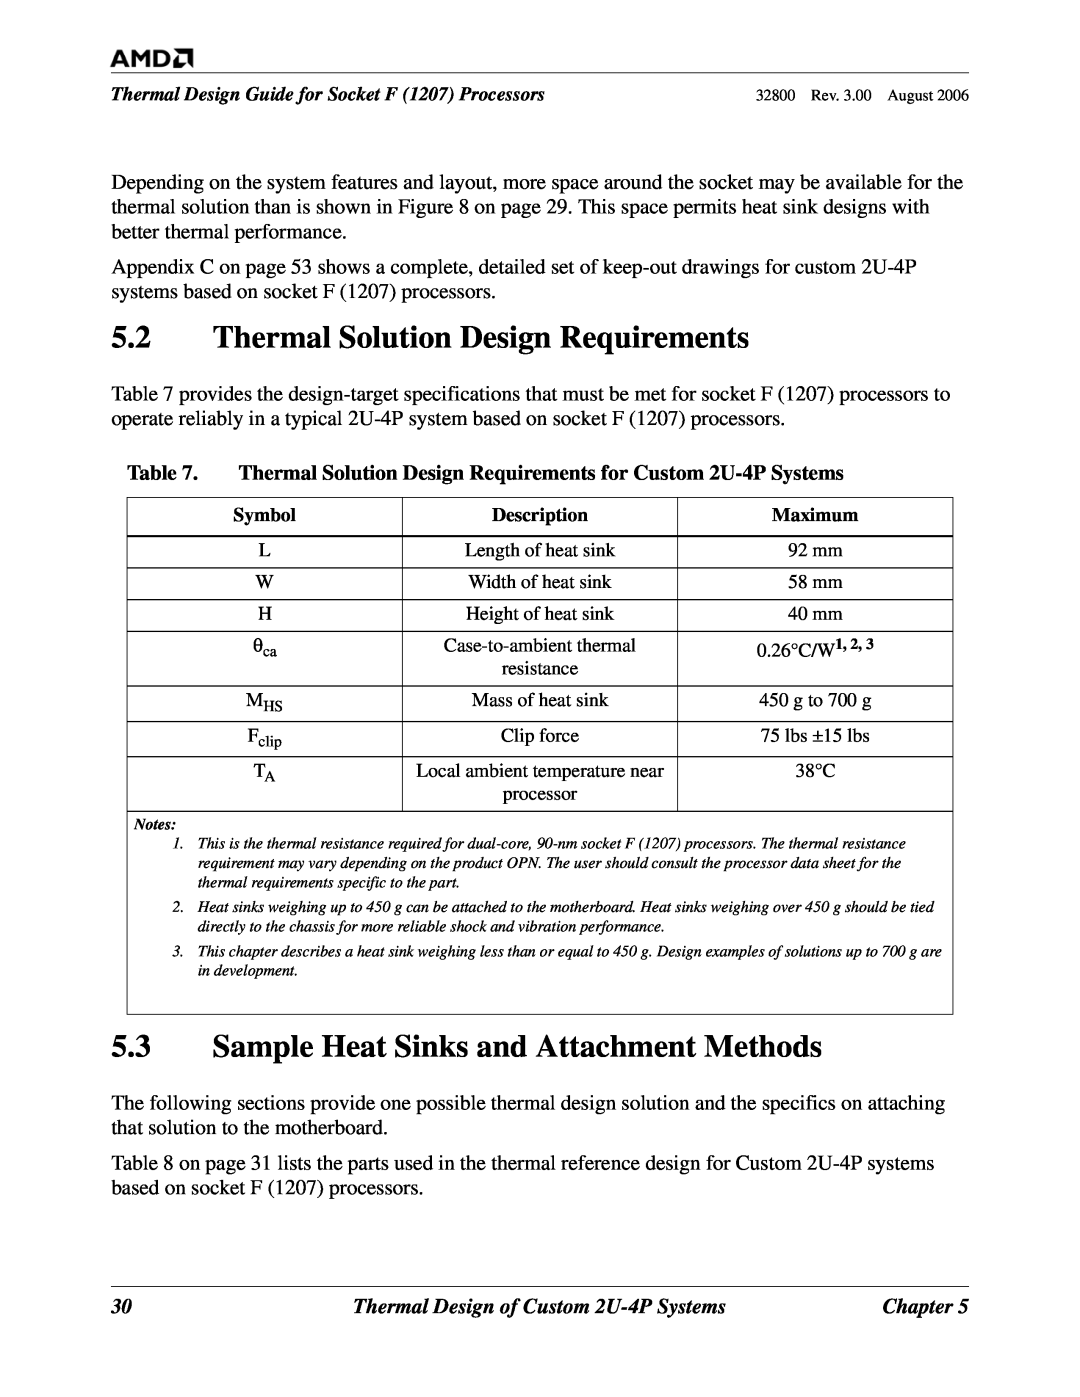 AMD 1207 manual Thermal Solution Design Requirements, Sample Heat Sinks and Attachment Methods 